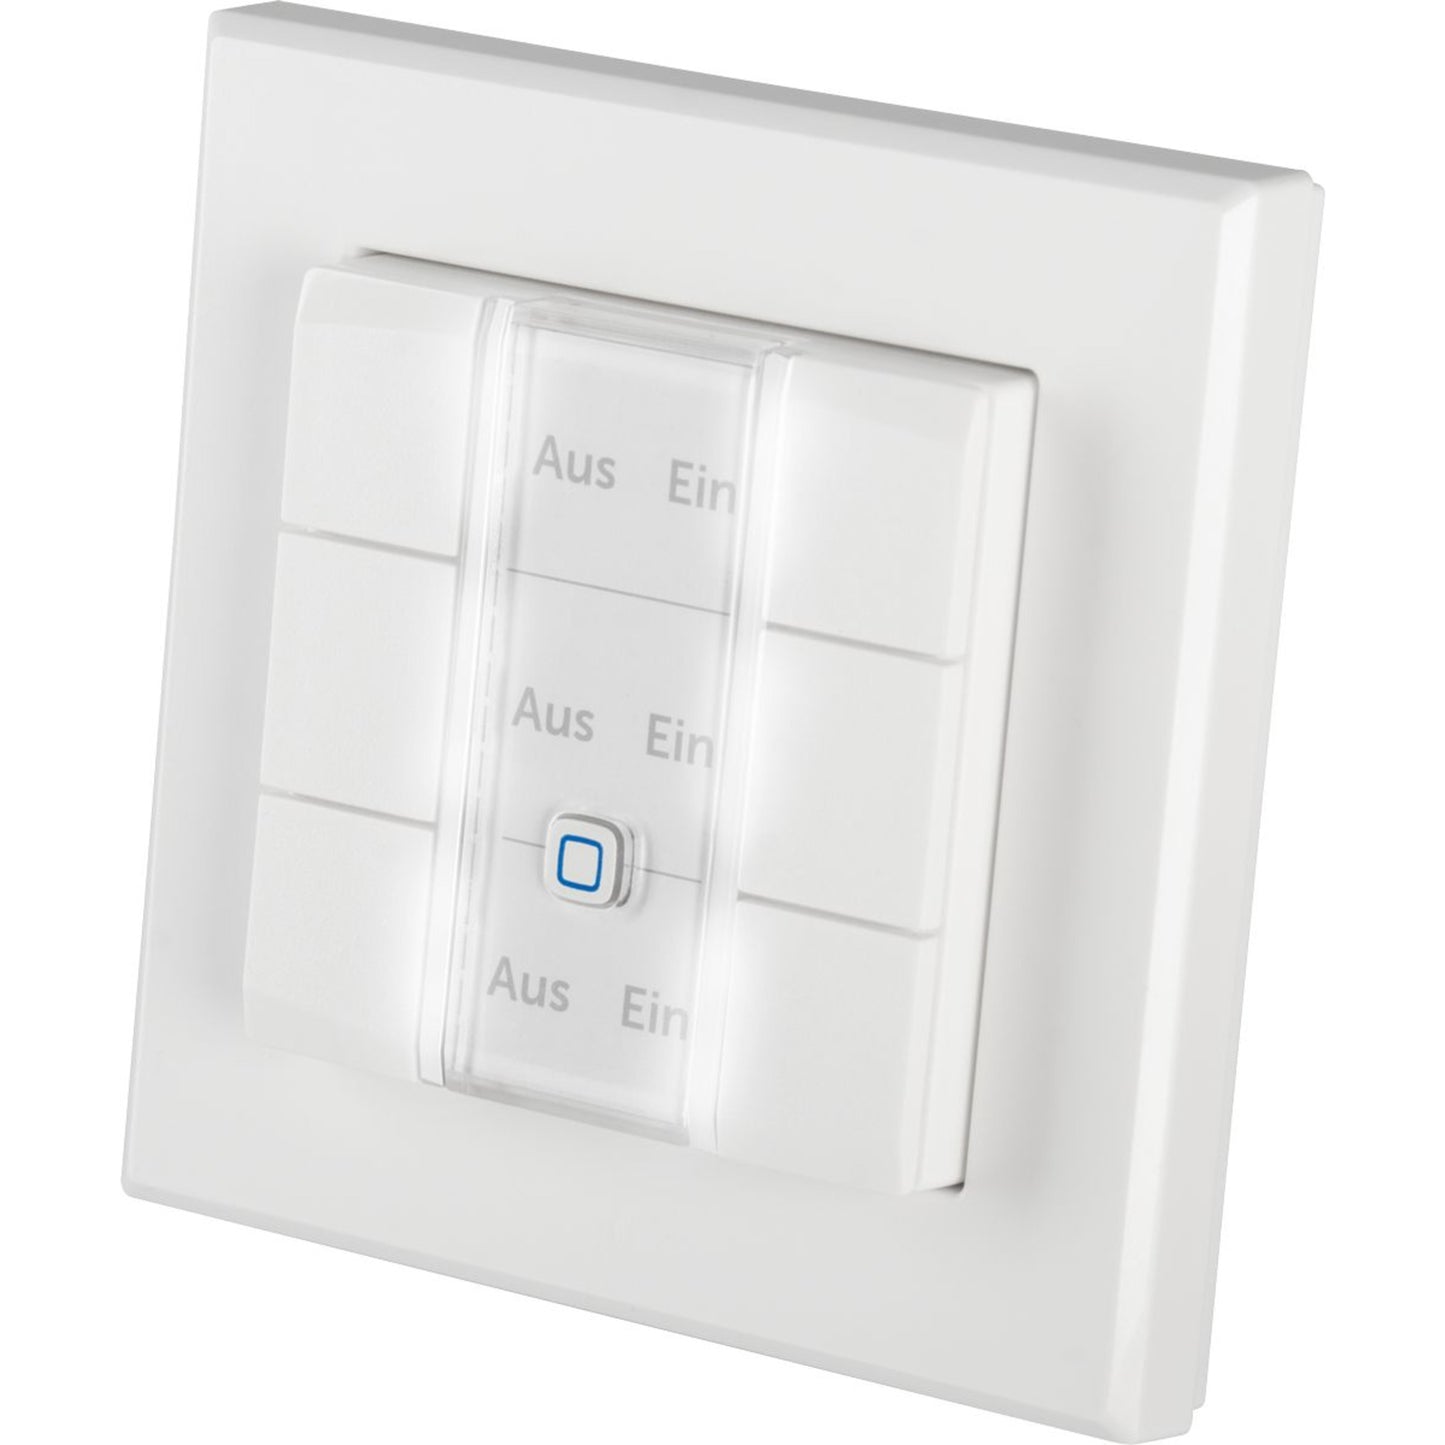 Homematic IP Wired Smart Home Wandtaster HmIPW-WRC6, 6-fach, mit LEDs 3 x HmIPW-WTH Sparset